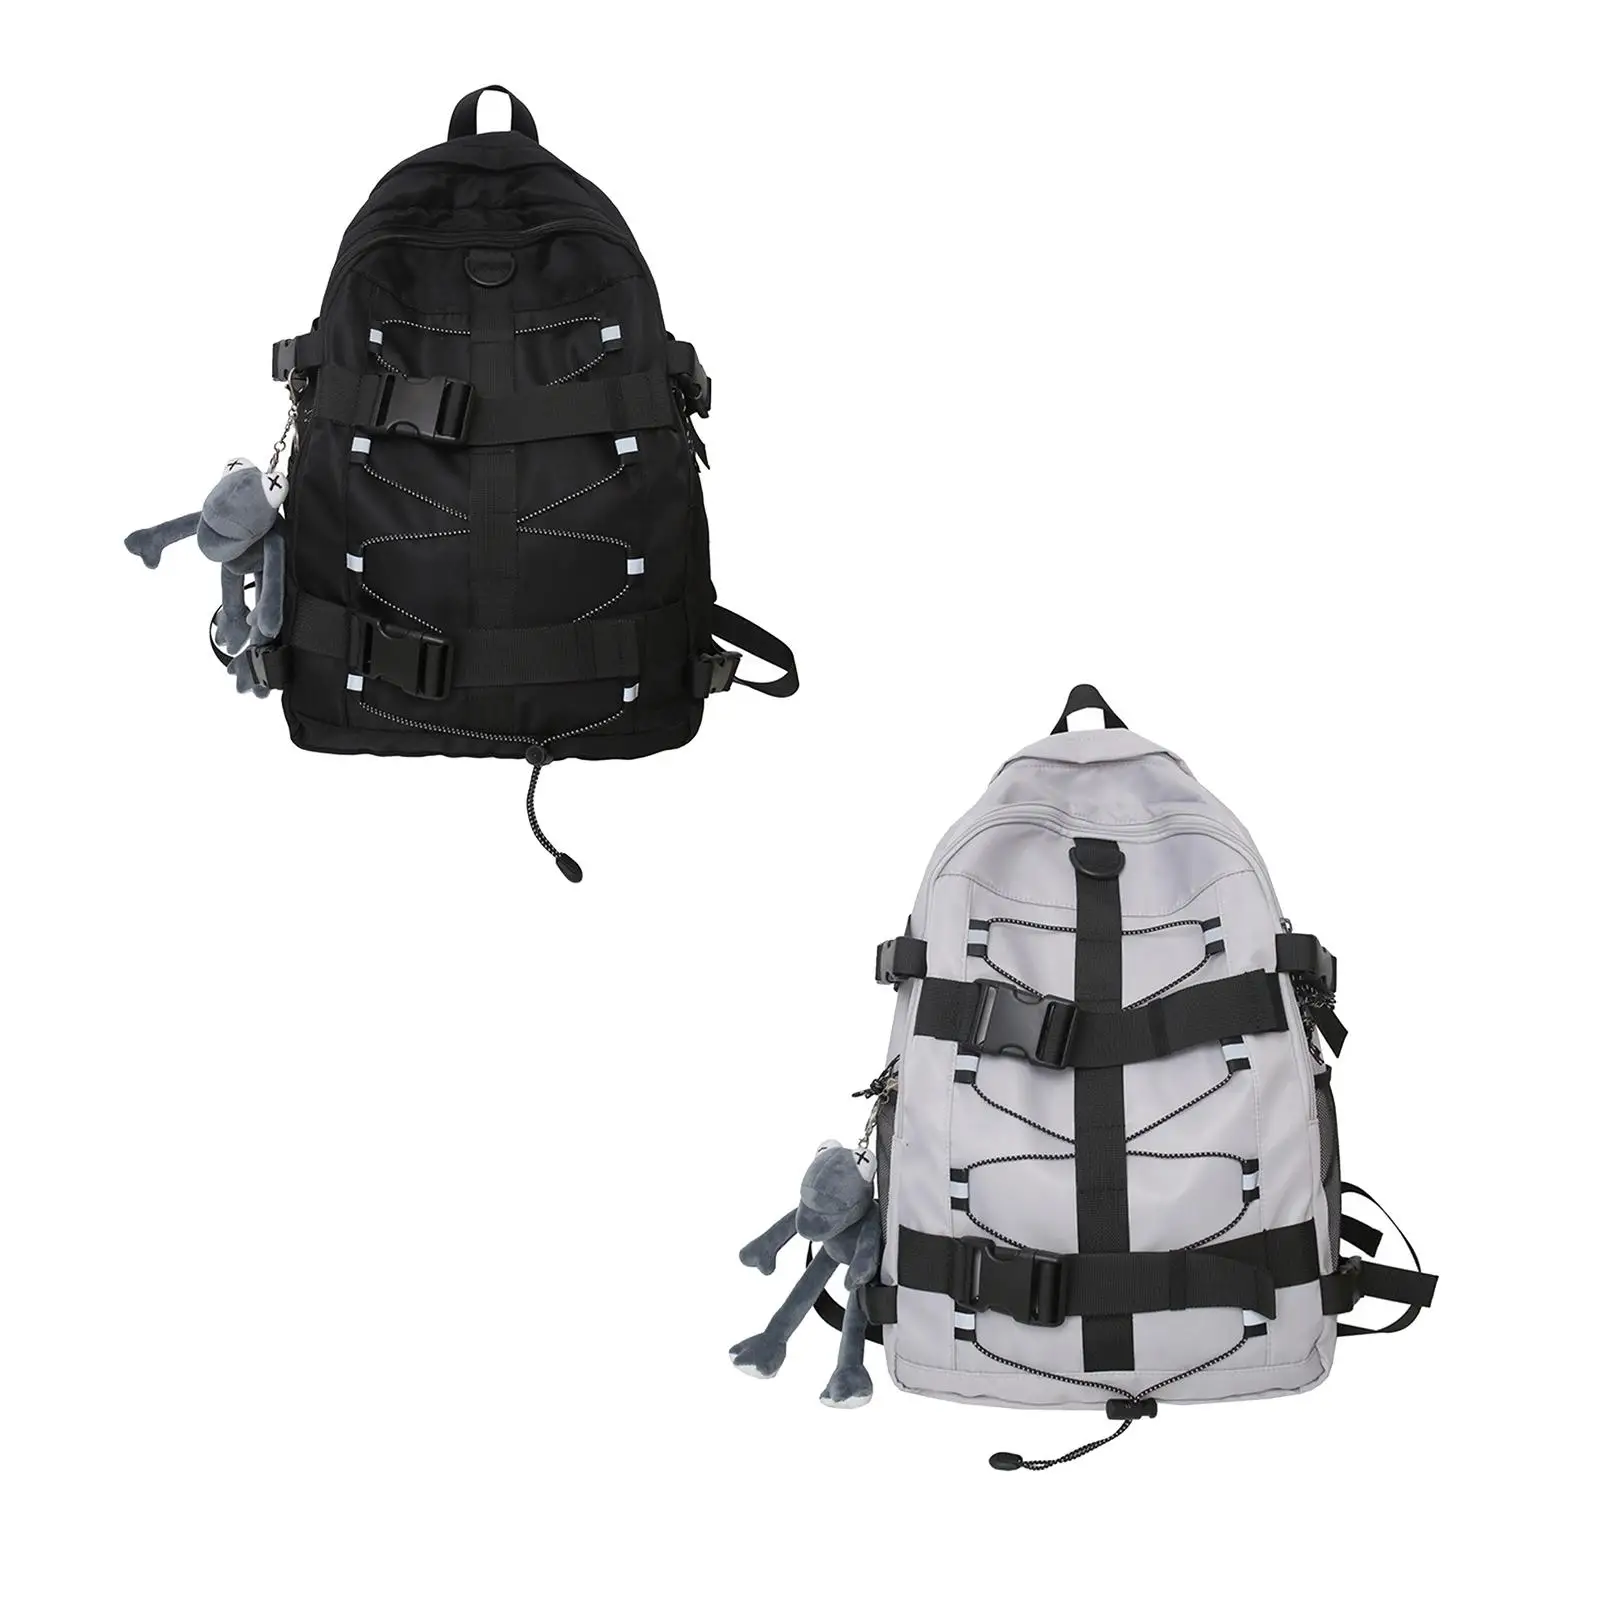 Backpack Large Capacity Premium Adjustable Straps Rucksack with Zipper Male Travel Bags for Outdoor Climbing Adults Unisex